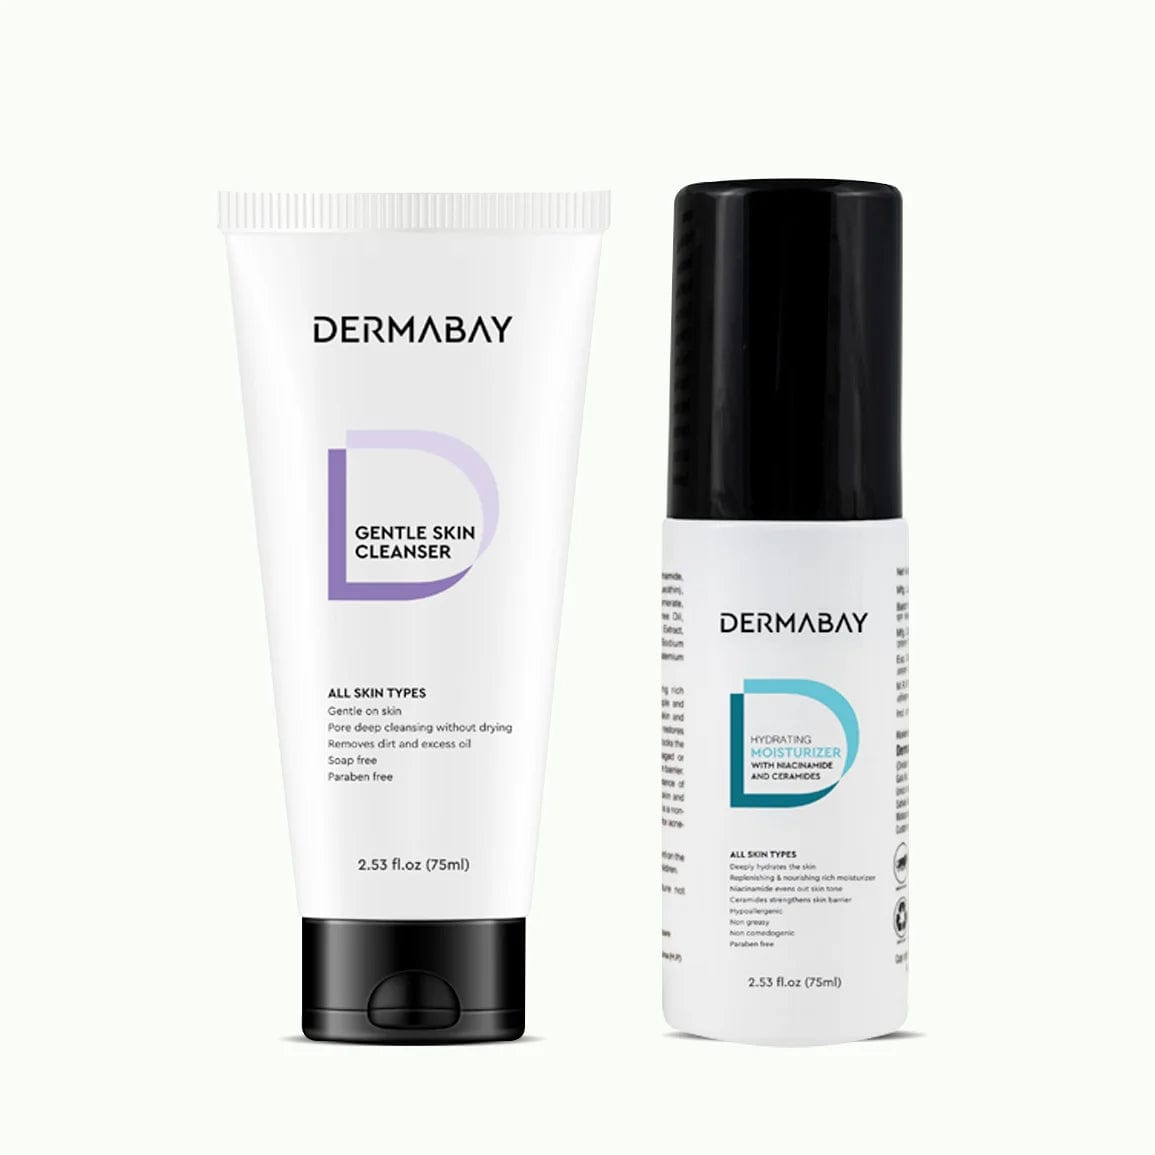 Cleanse and Glow Combo - DermabayDermabay